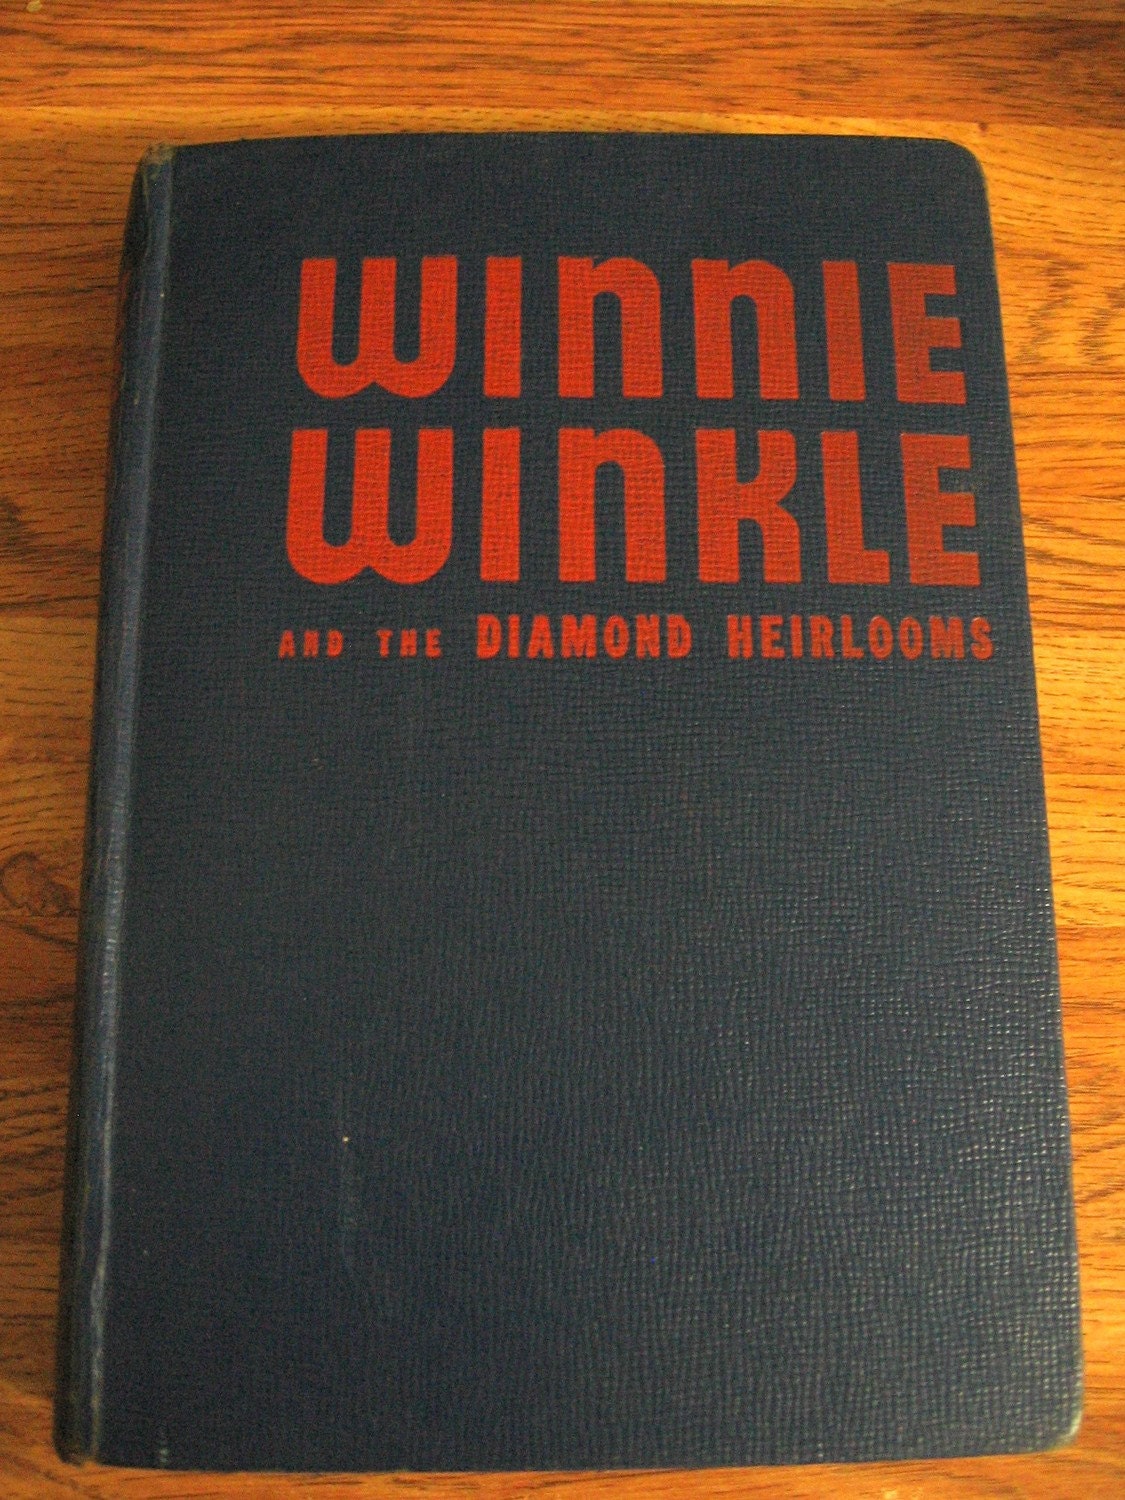 Winnie Winkle and the Diamond Heirlooms (An original story based on Martin Branner's famous newspaper strip 